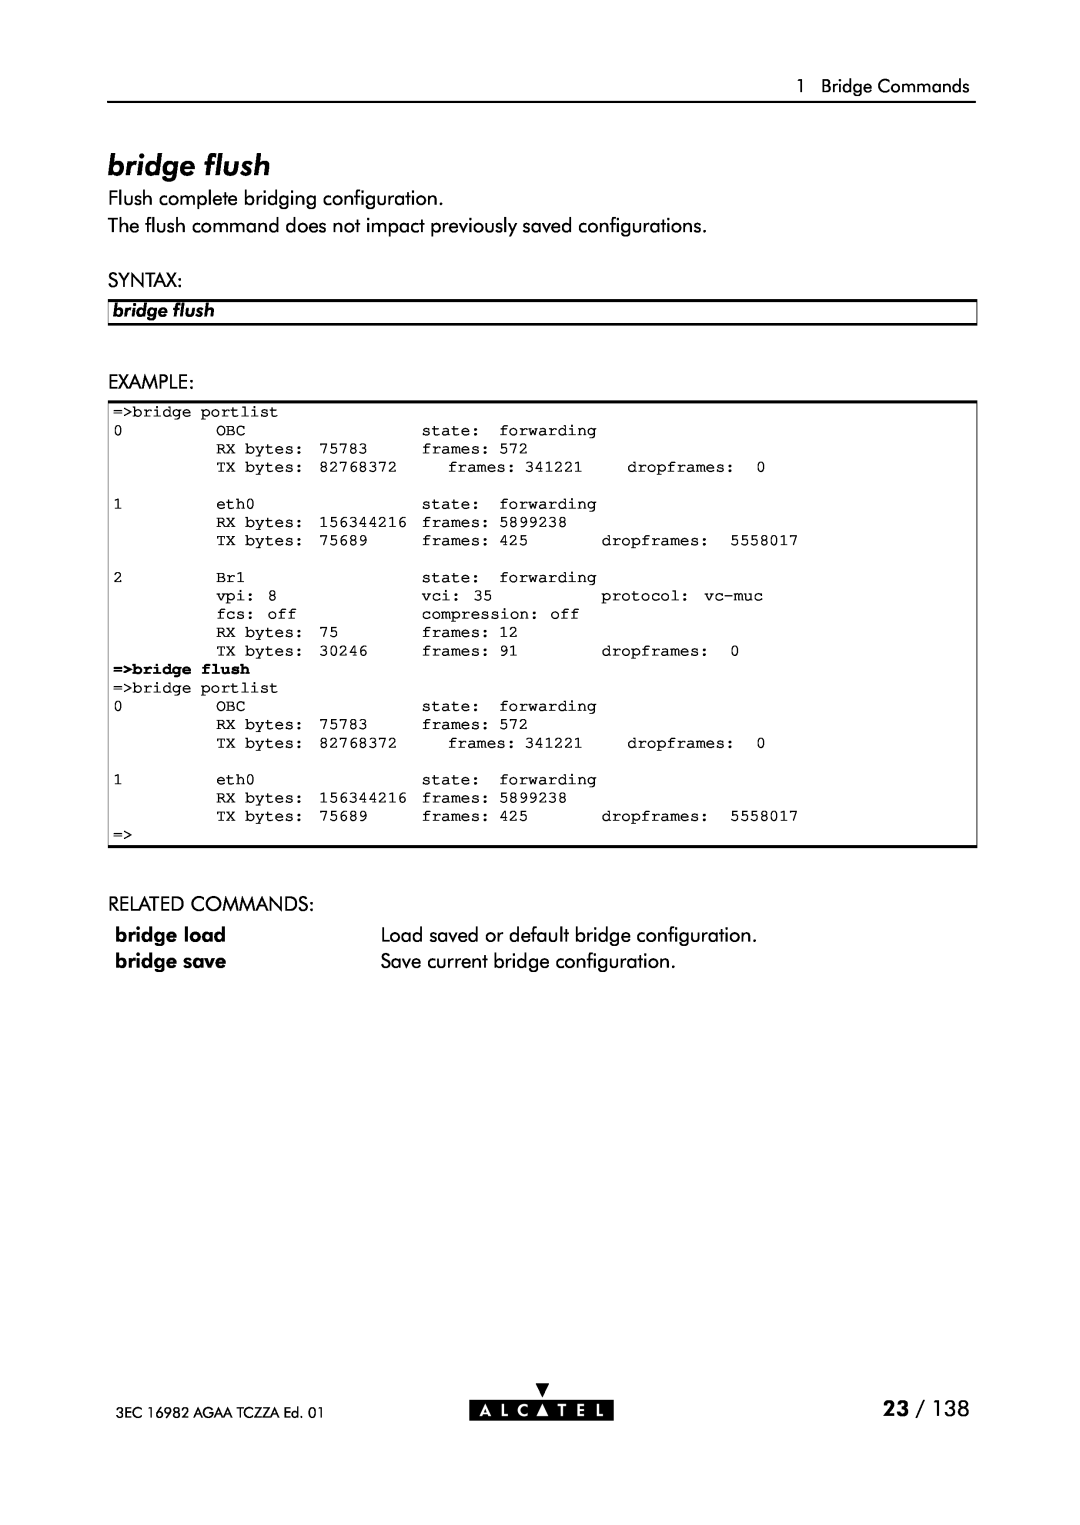 Alcatel Carrier Internetworking Solutions 350I manual bridge flush, Flush complete bridging configuration, Syntax, Example 